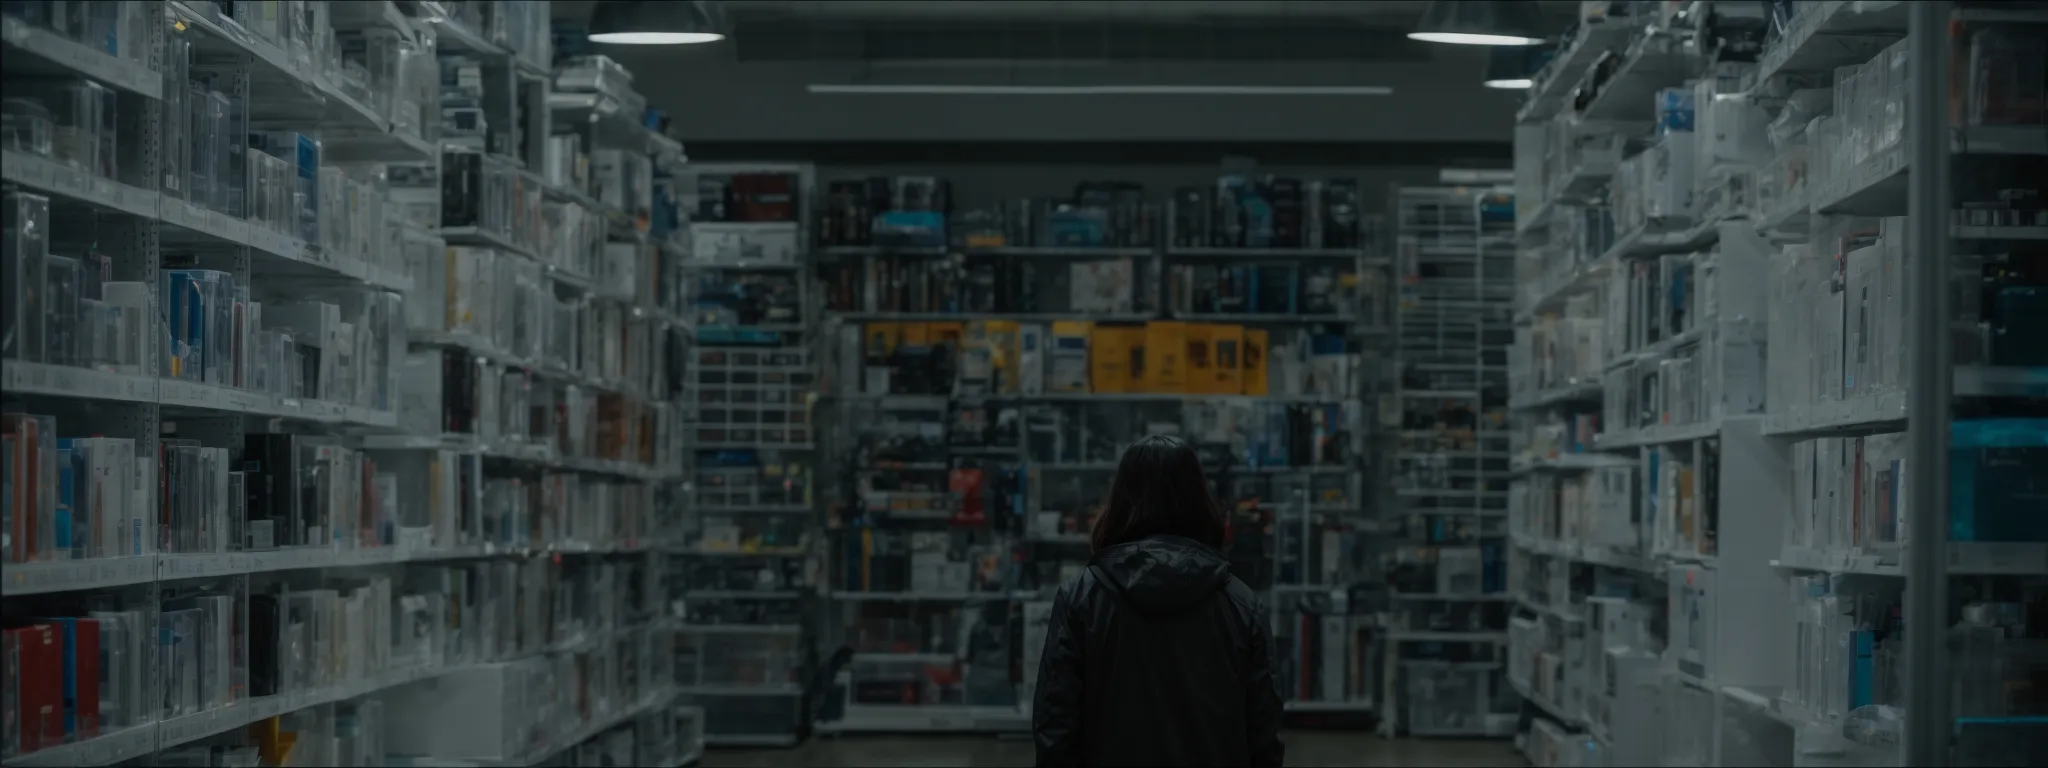 a person stands before a wall of categorized shelves, each containing various high-tech gadgets and devices.